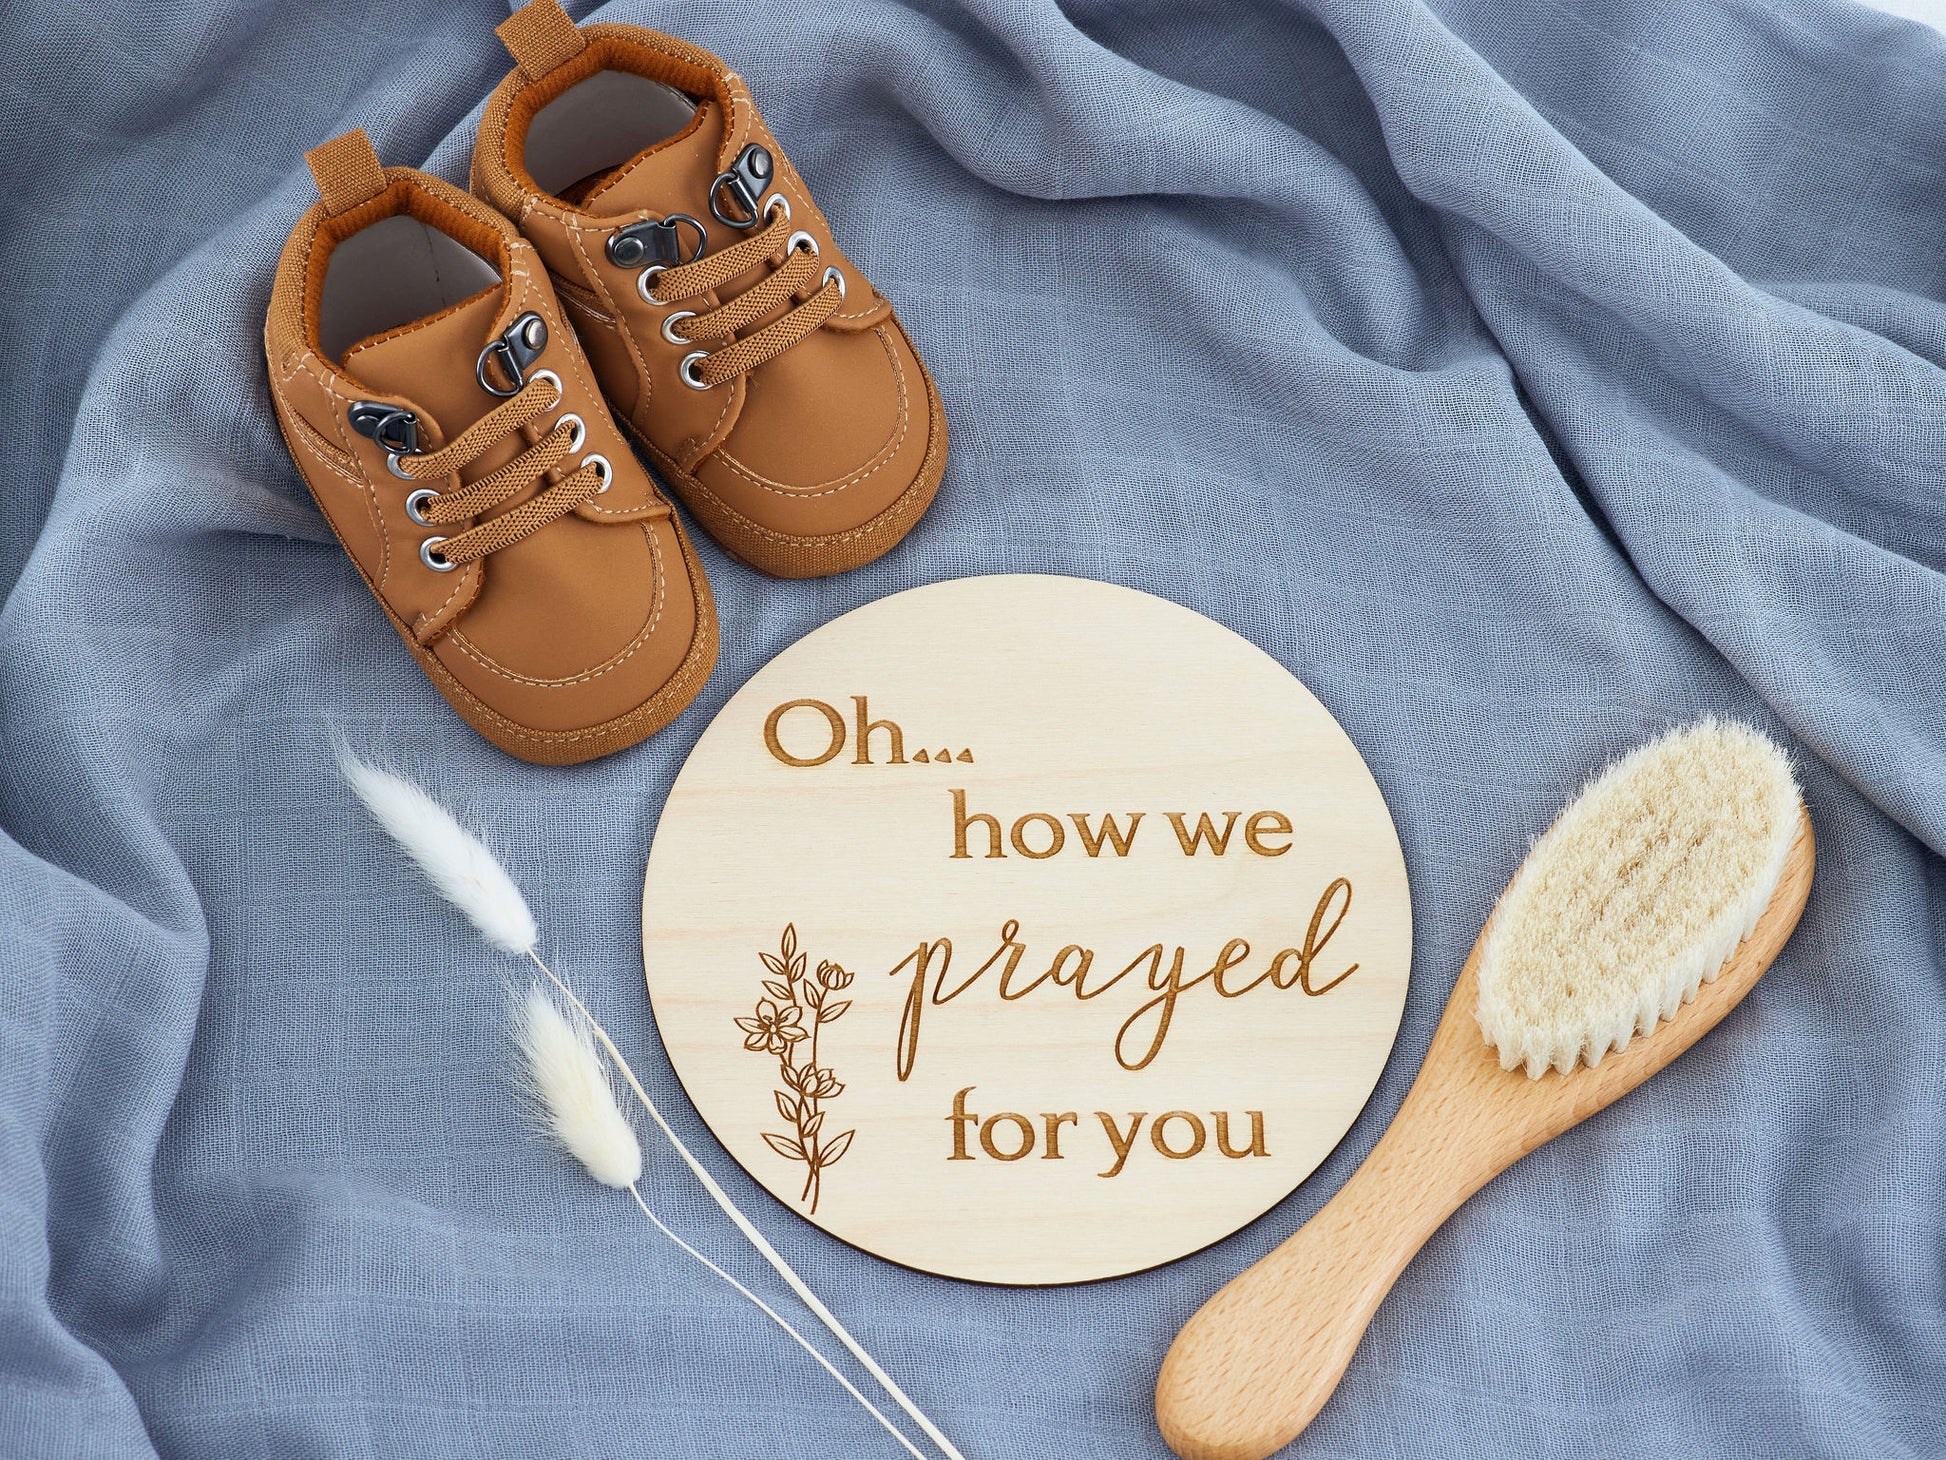 Oh how we wished for you - Pregnancy Plaque  Miss Ali's 15 CM Prayed 